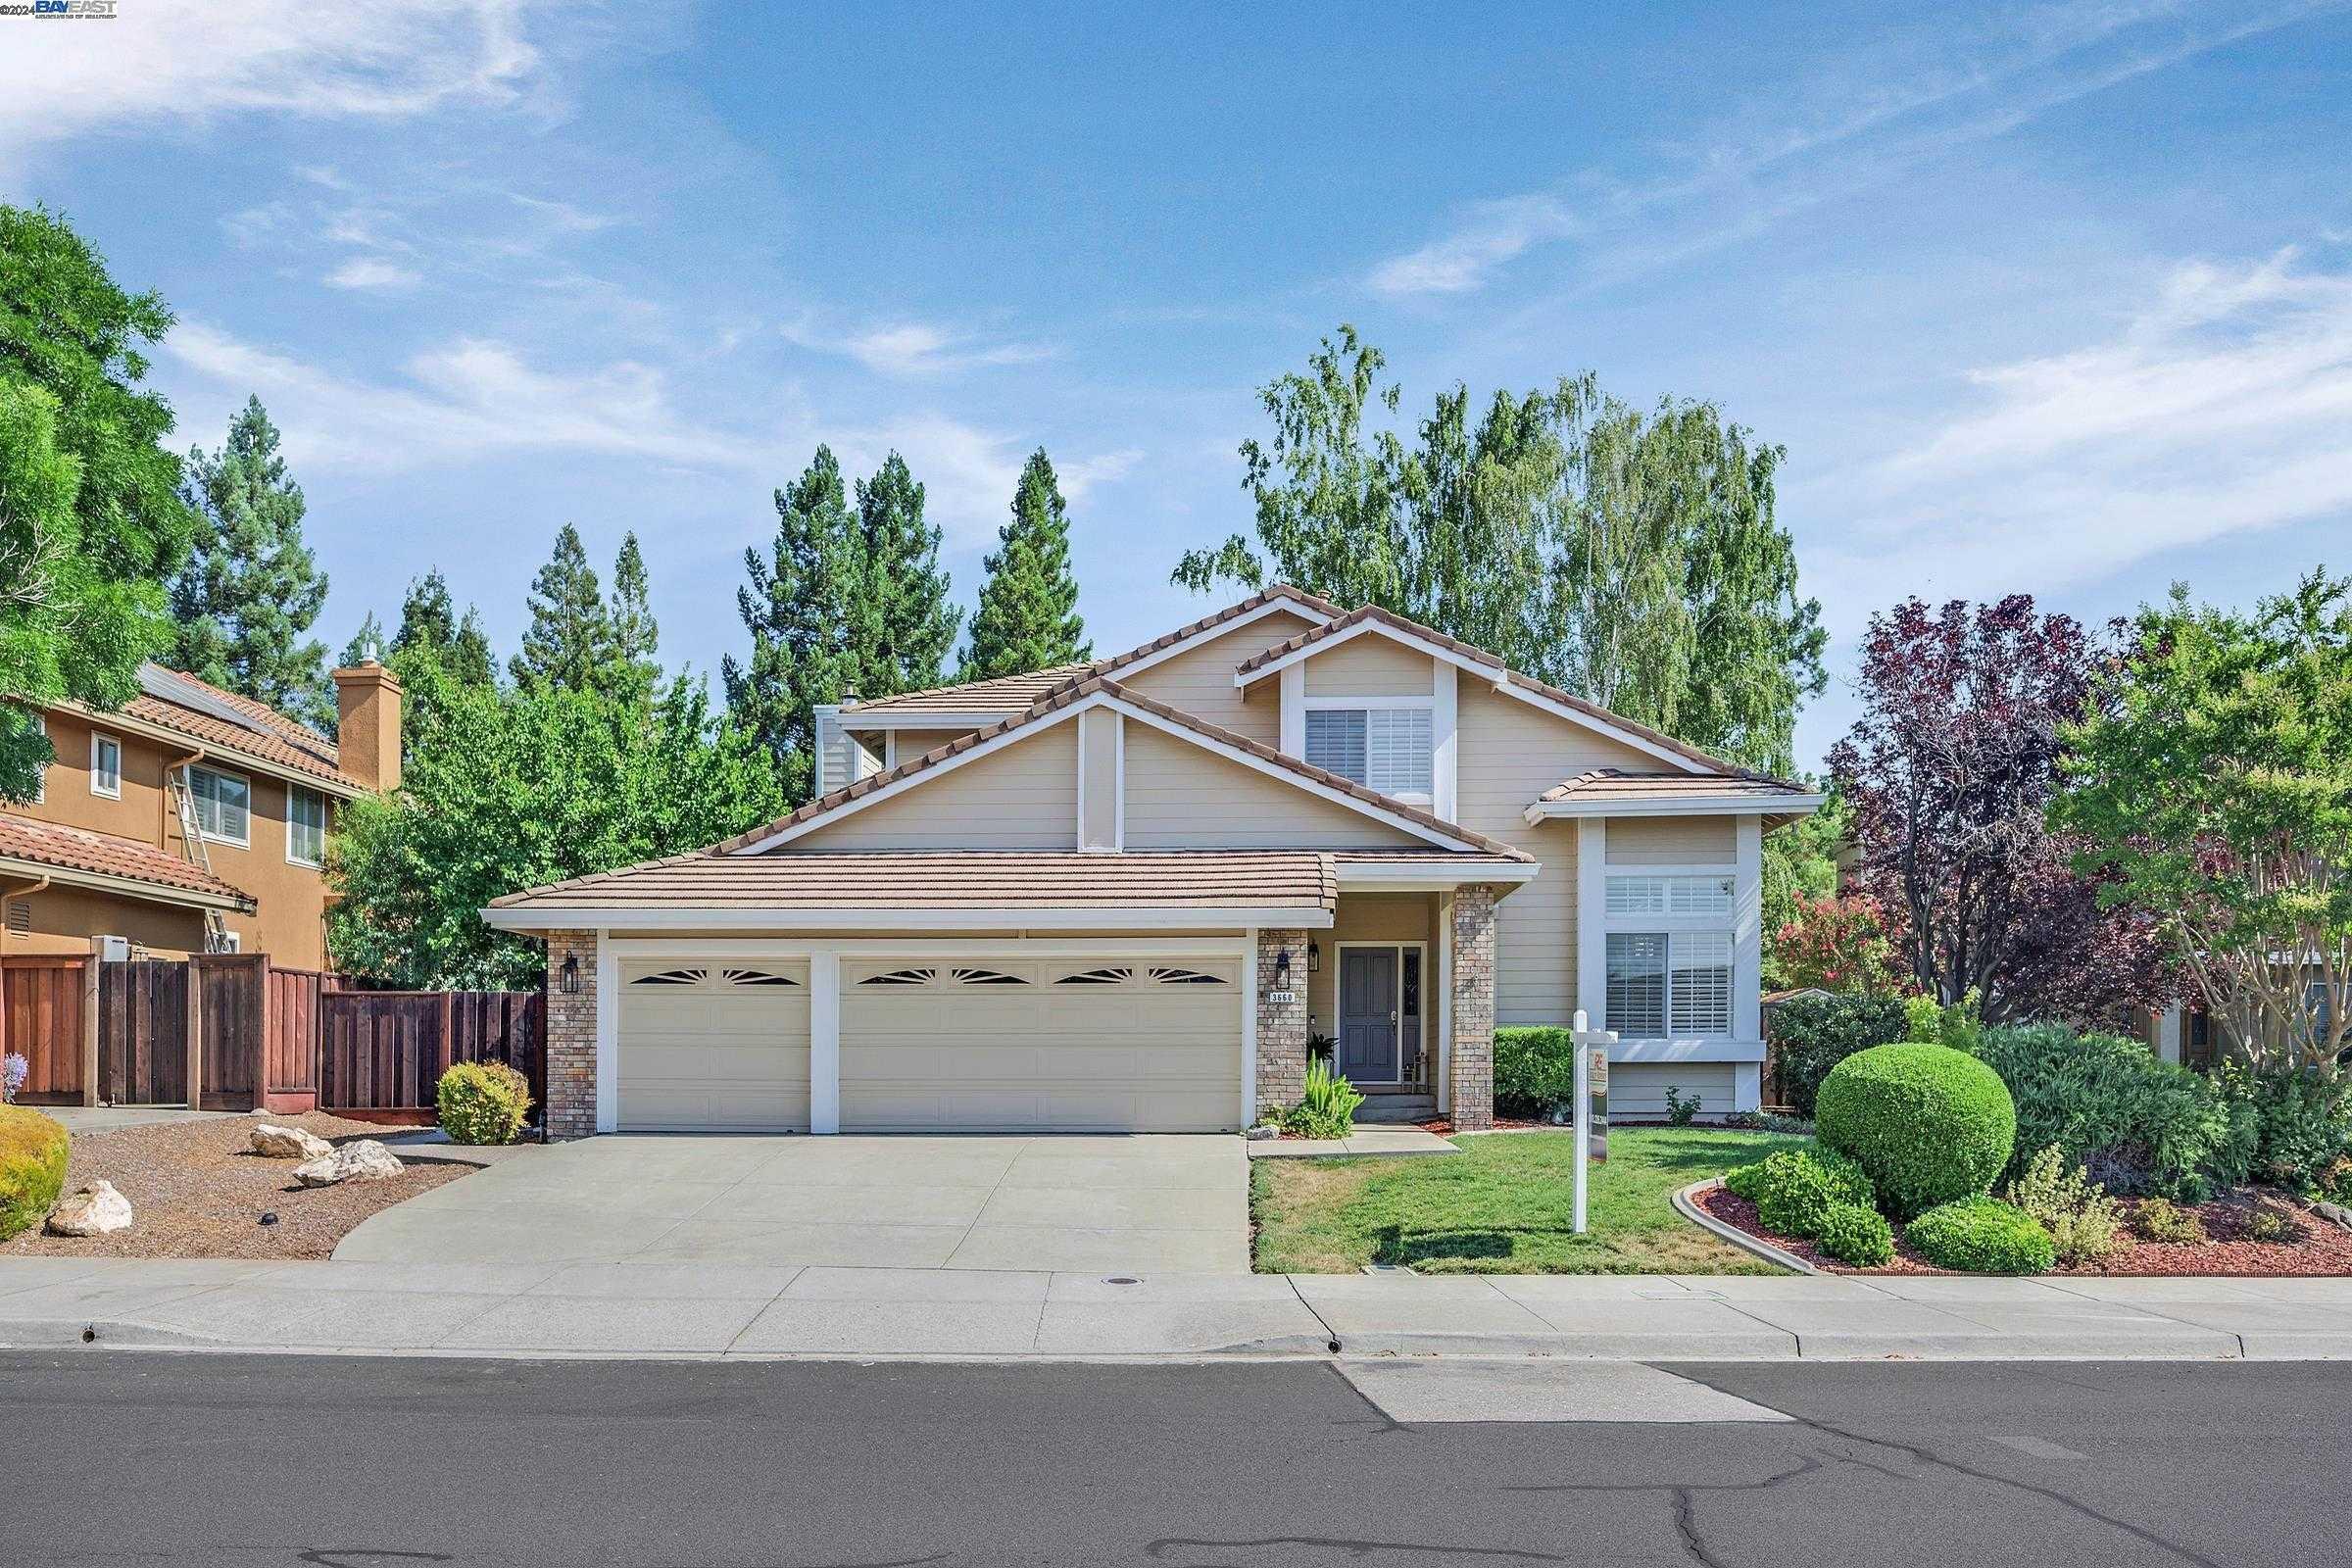 3660 Edinburgh Dr., 41066455, Livermore, Detached,  for sale, Mohan Chalagalla, REALTY EXPERTS®